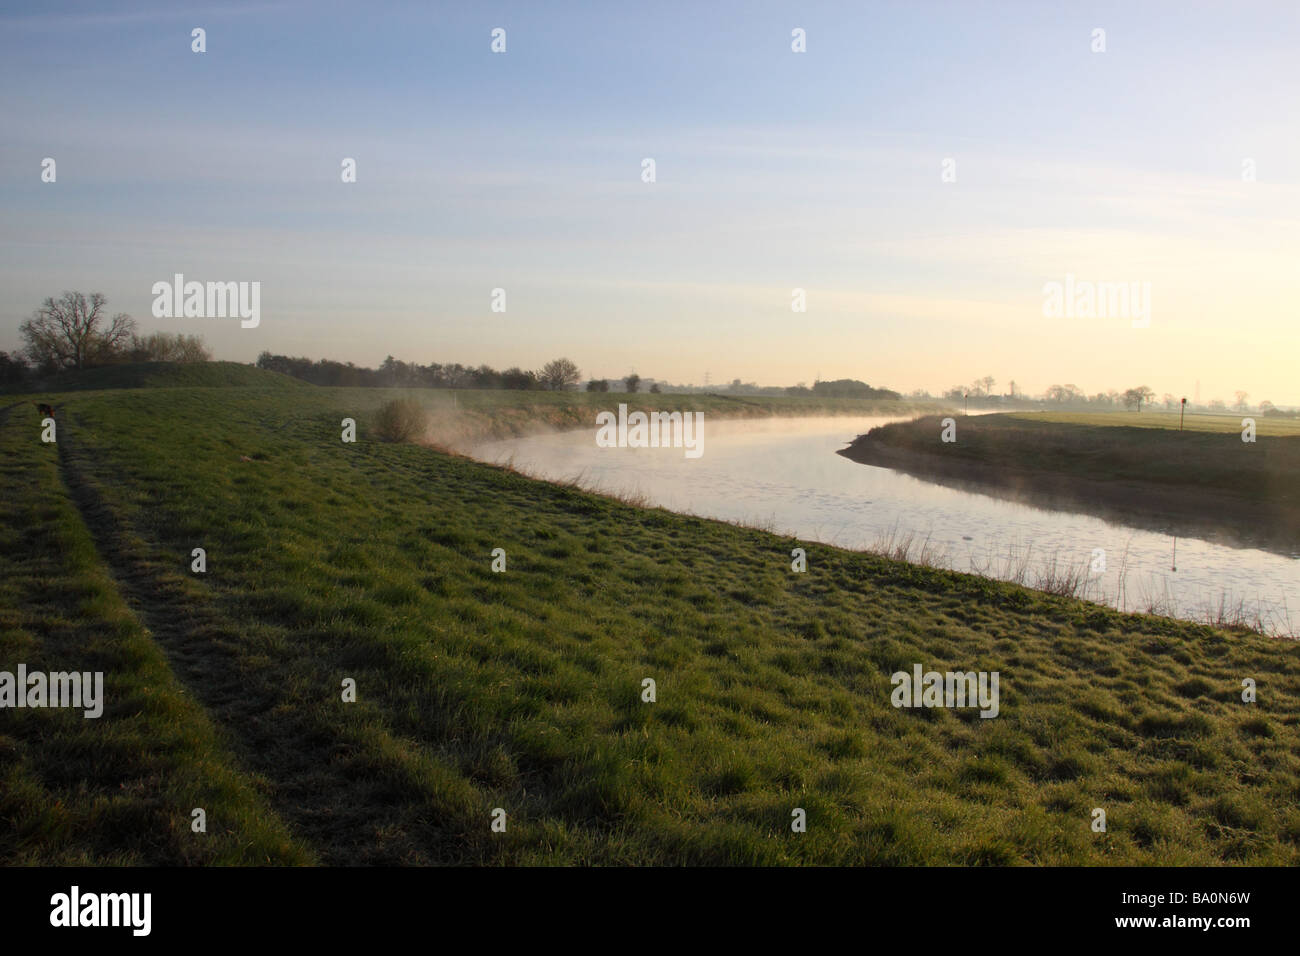 Meandering stretch of the river trent near cromwell in nottinghamshire on a misty morning Stock Photo